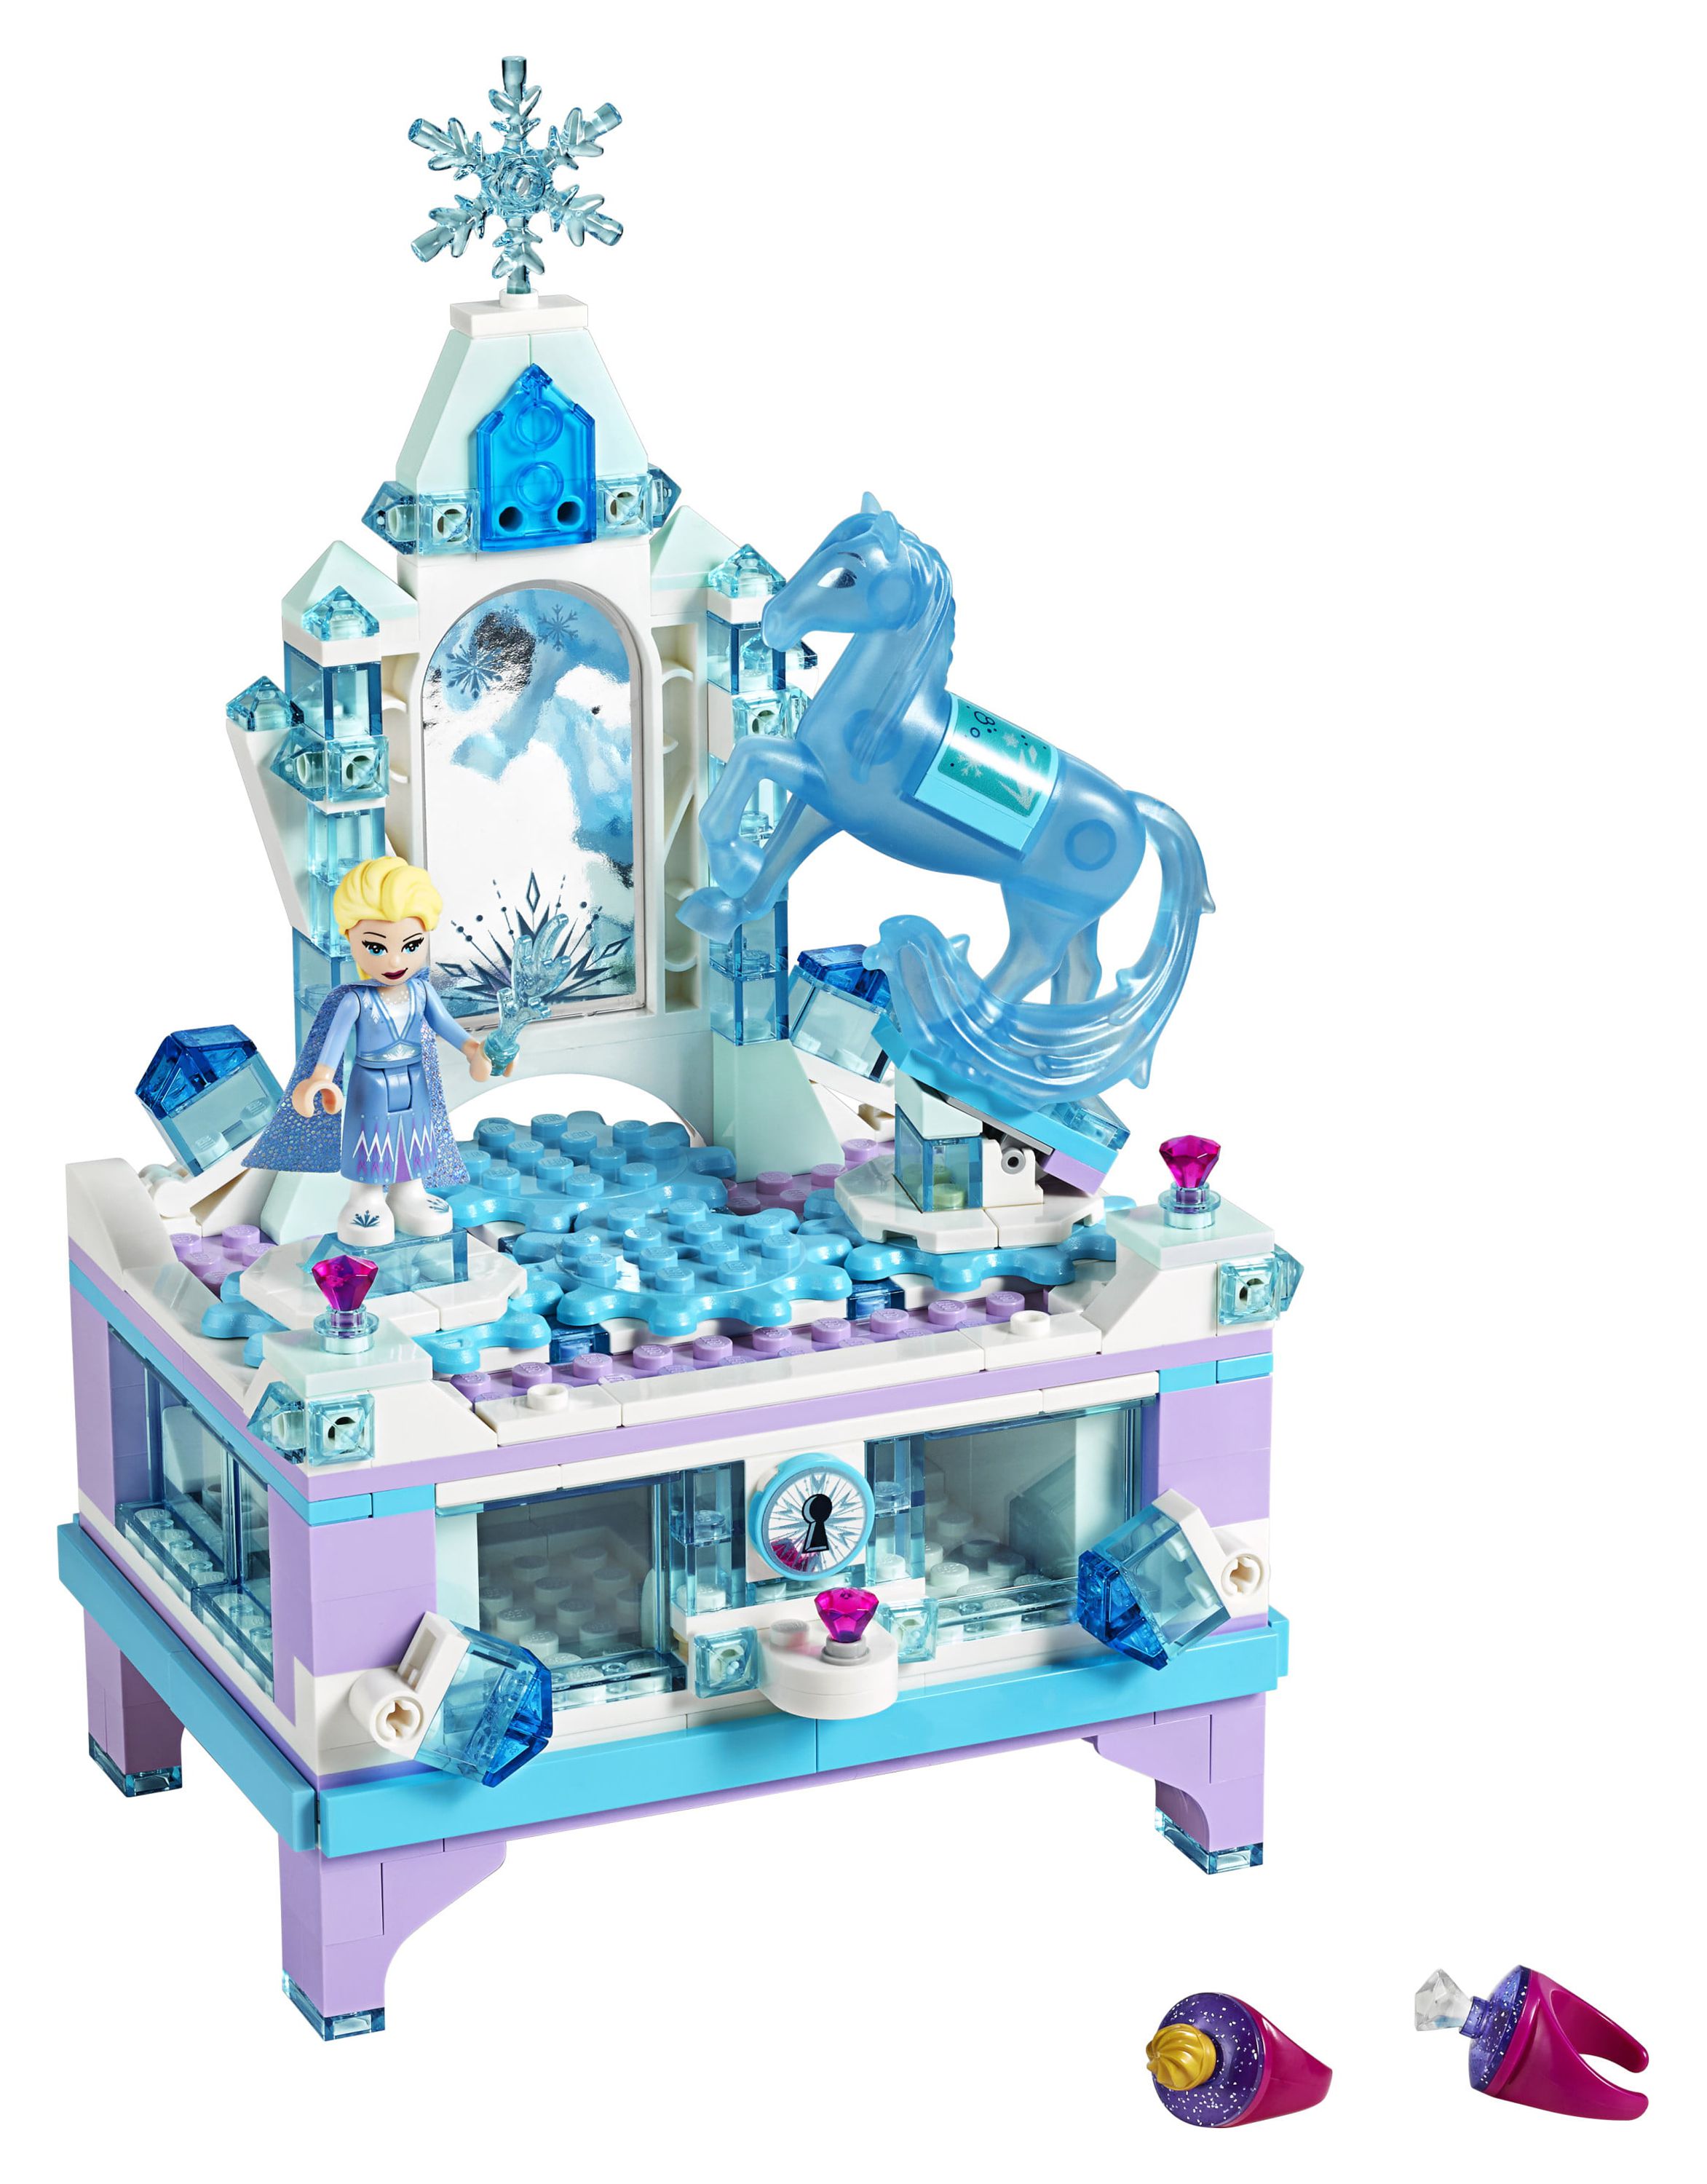 LEGO Disney Frozen 2 Elsa's Jewelry Box Creation 41168, Collectible Frozen Toy with Princess Elsa Mini-Doll and Nokk Figure, Kids Can Build a Jewelry Box with Lockable Drawer & Mirror, Disney Gift - image 4 of 8